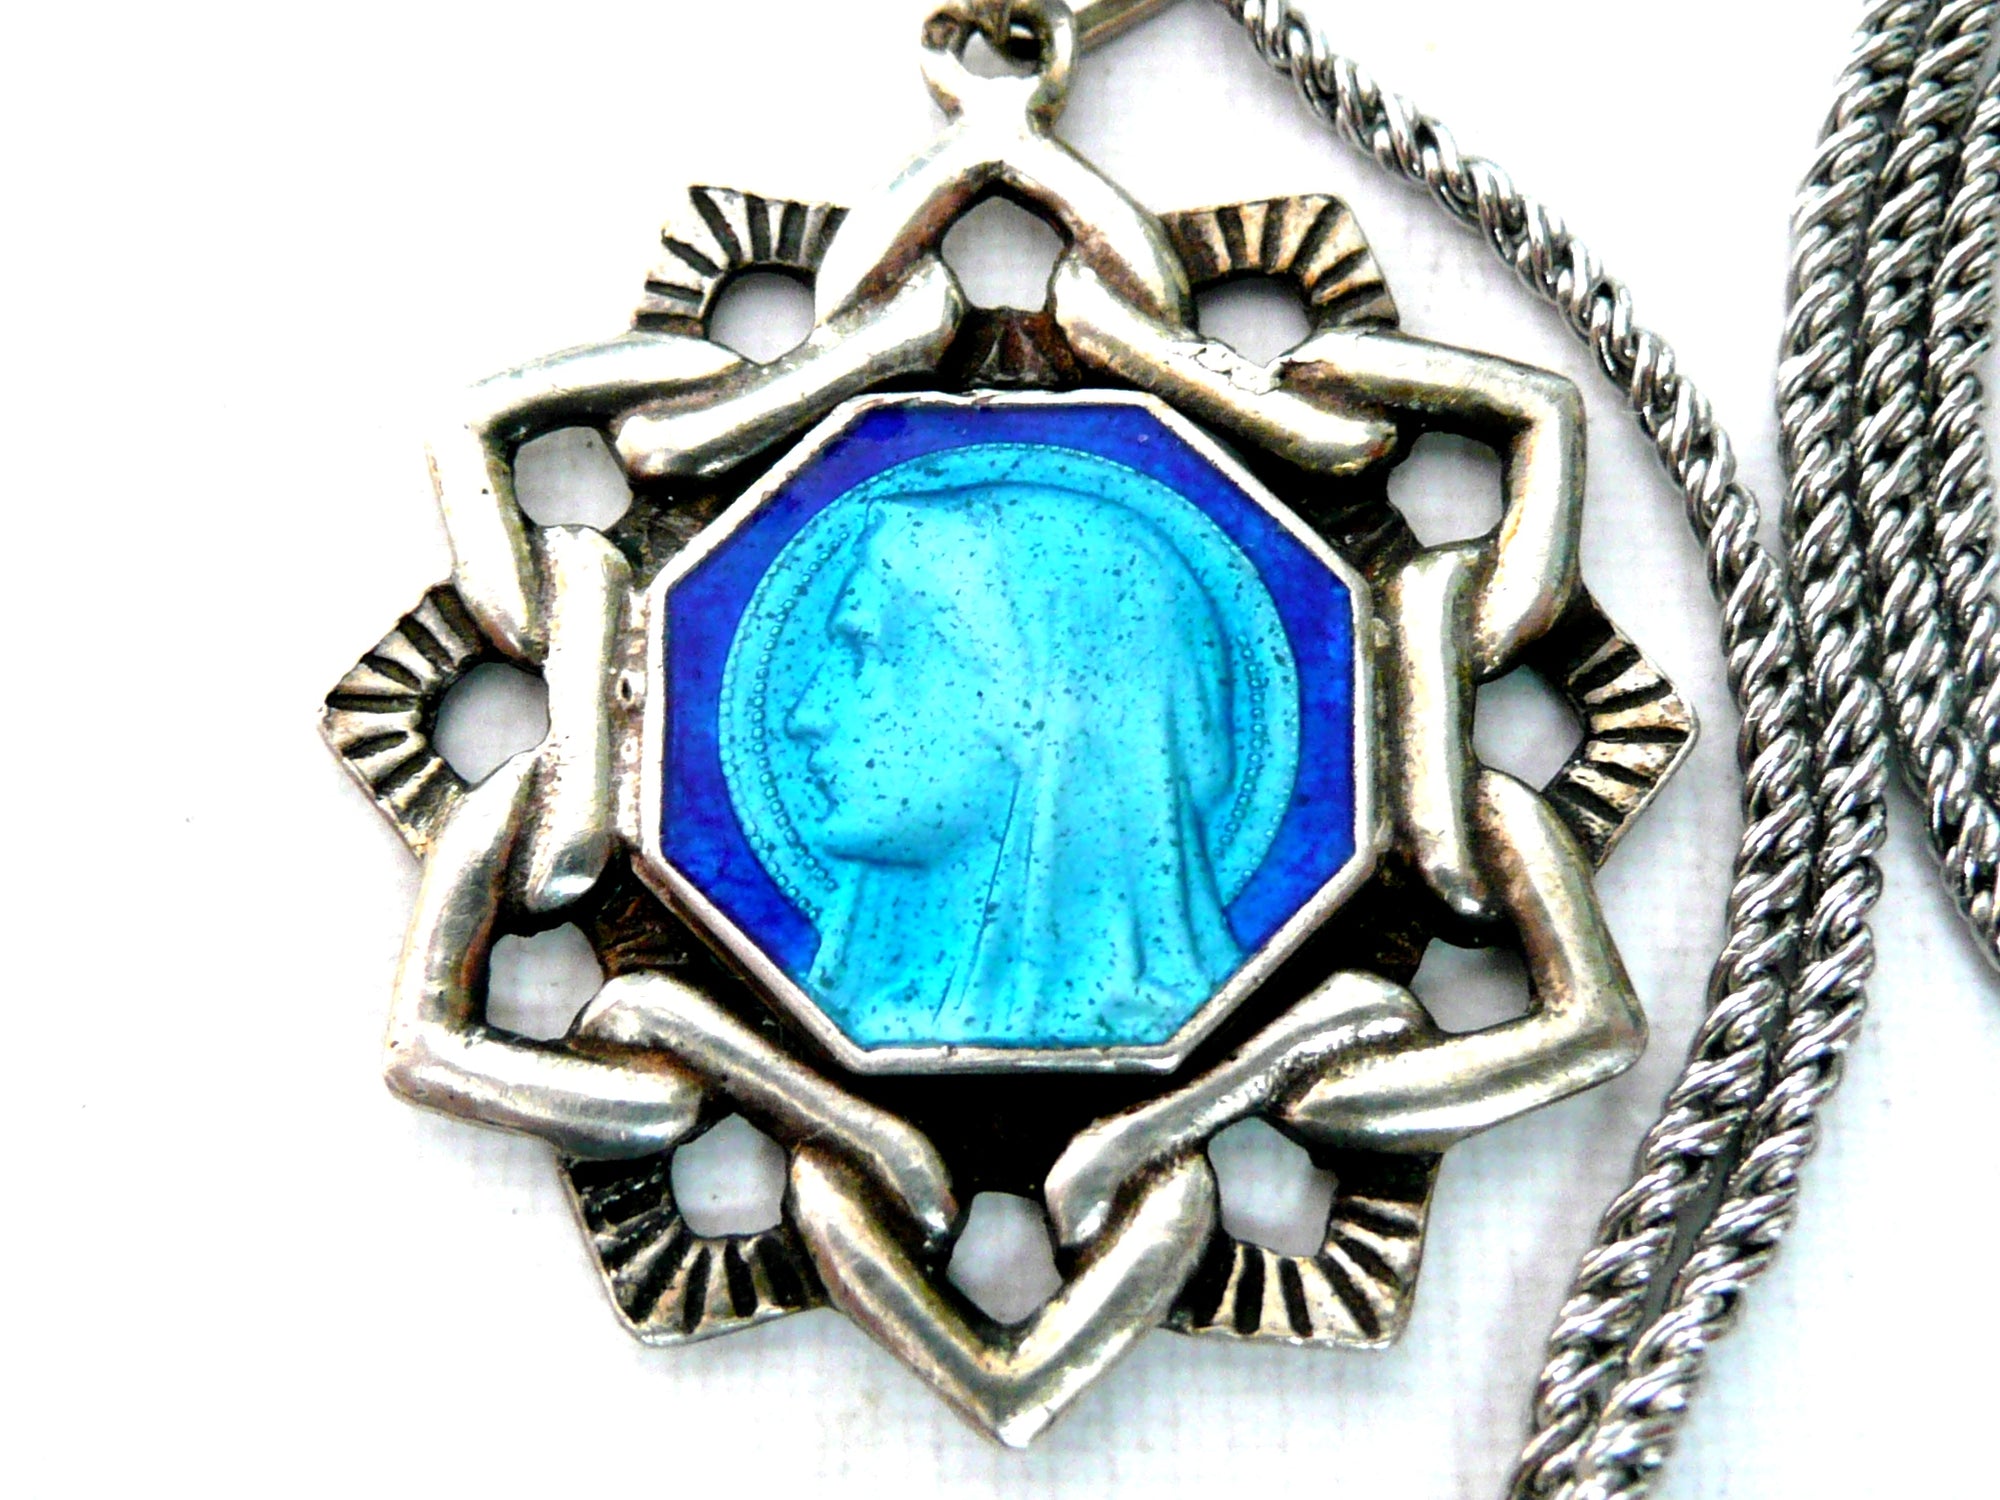 Virgin Mary Necklace - Vintage French Silver and Blue Enamel Medal